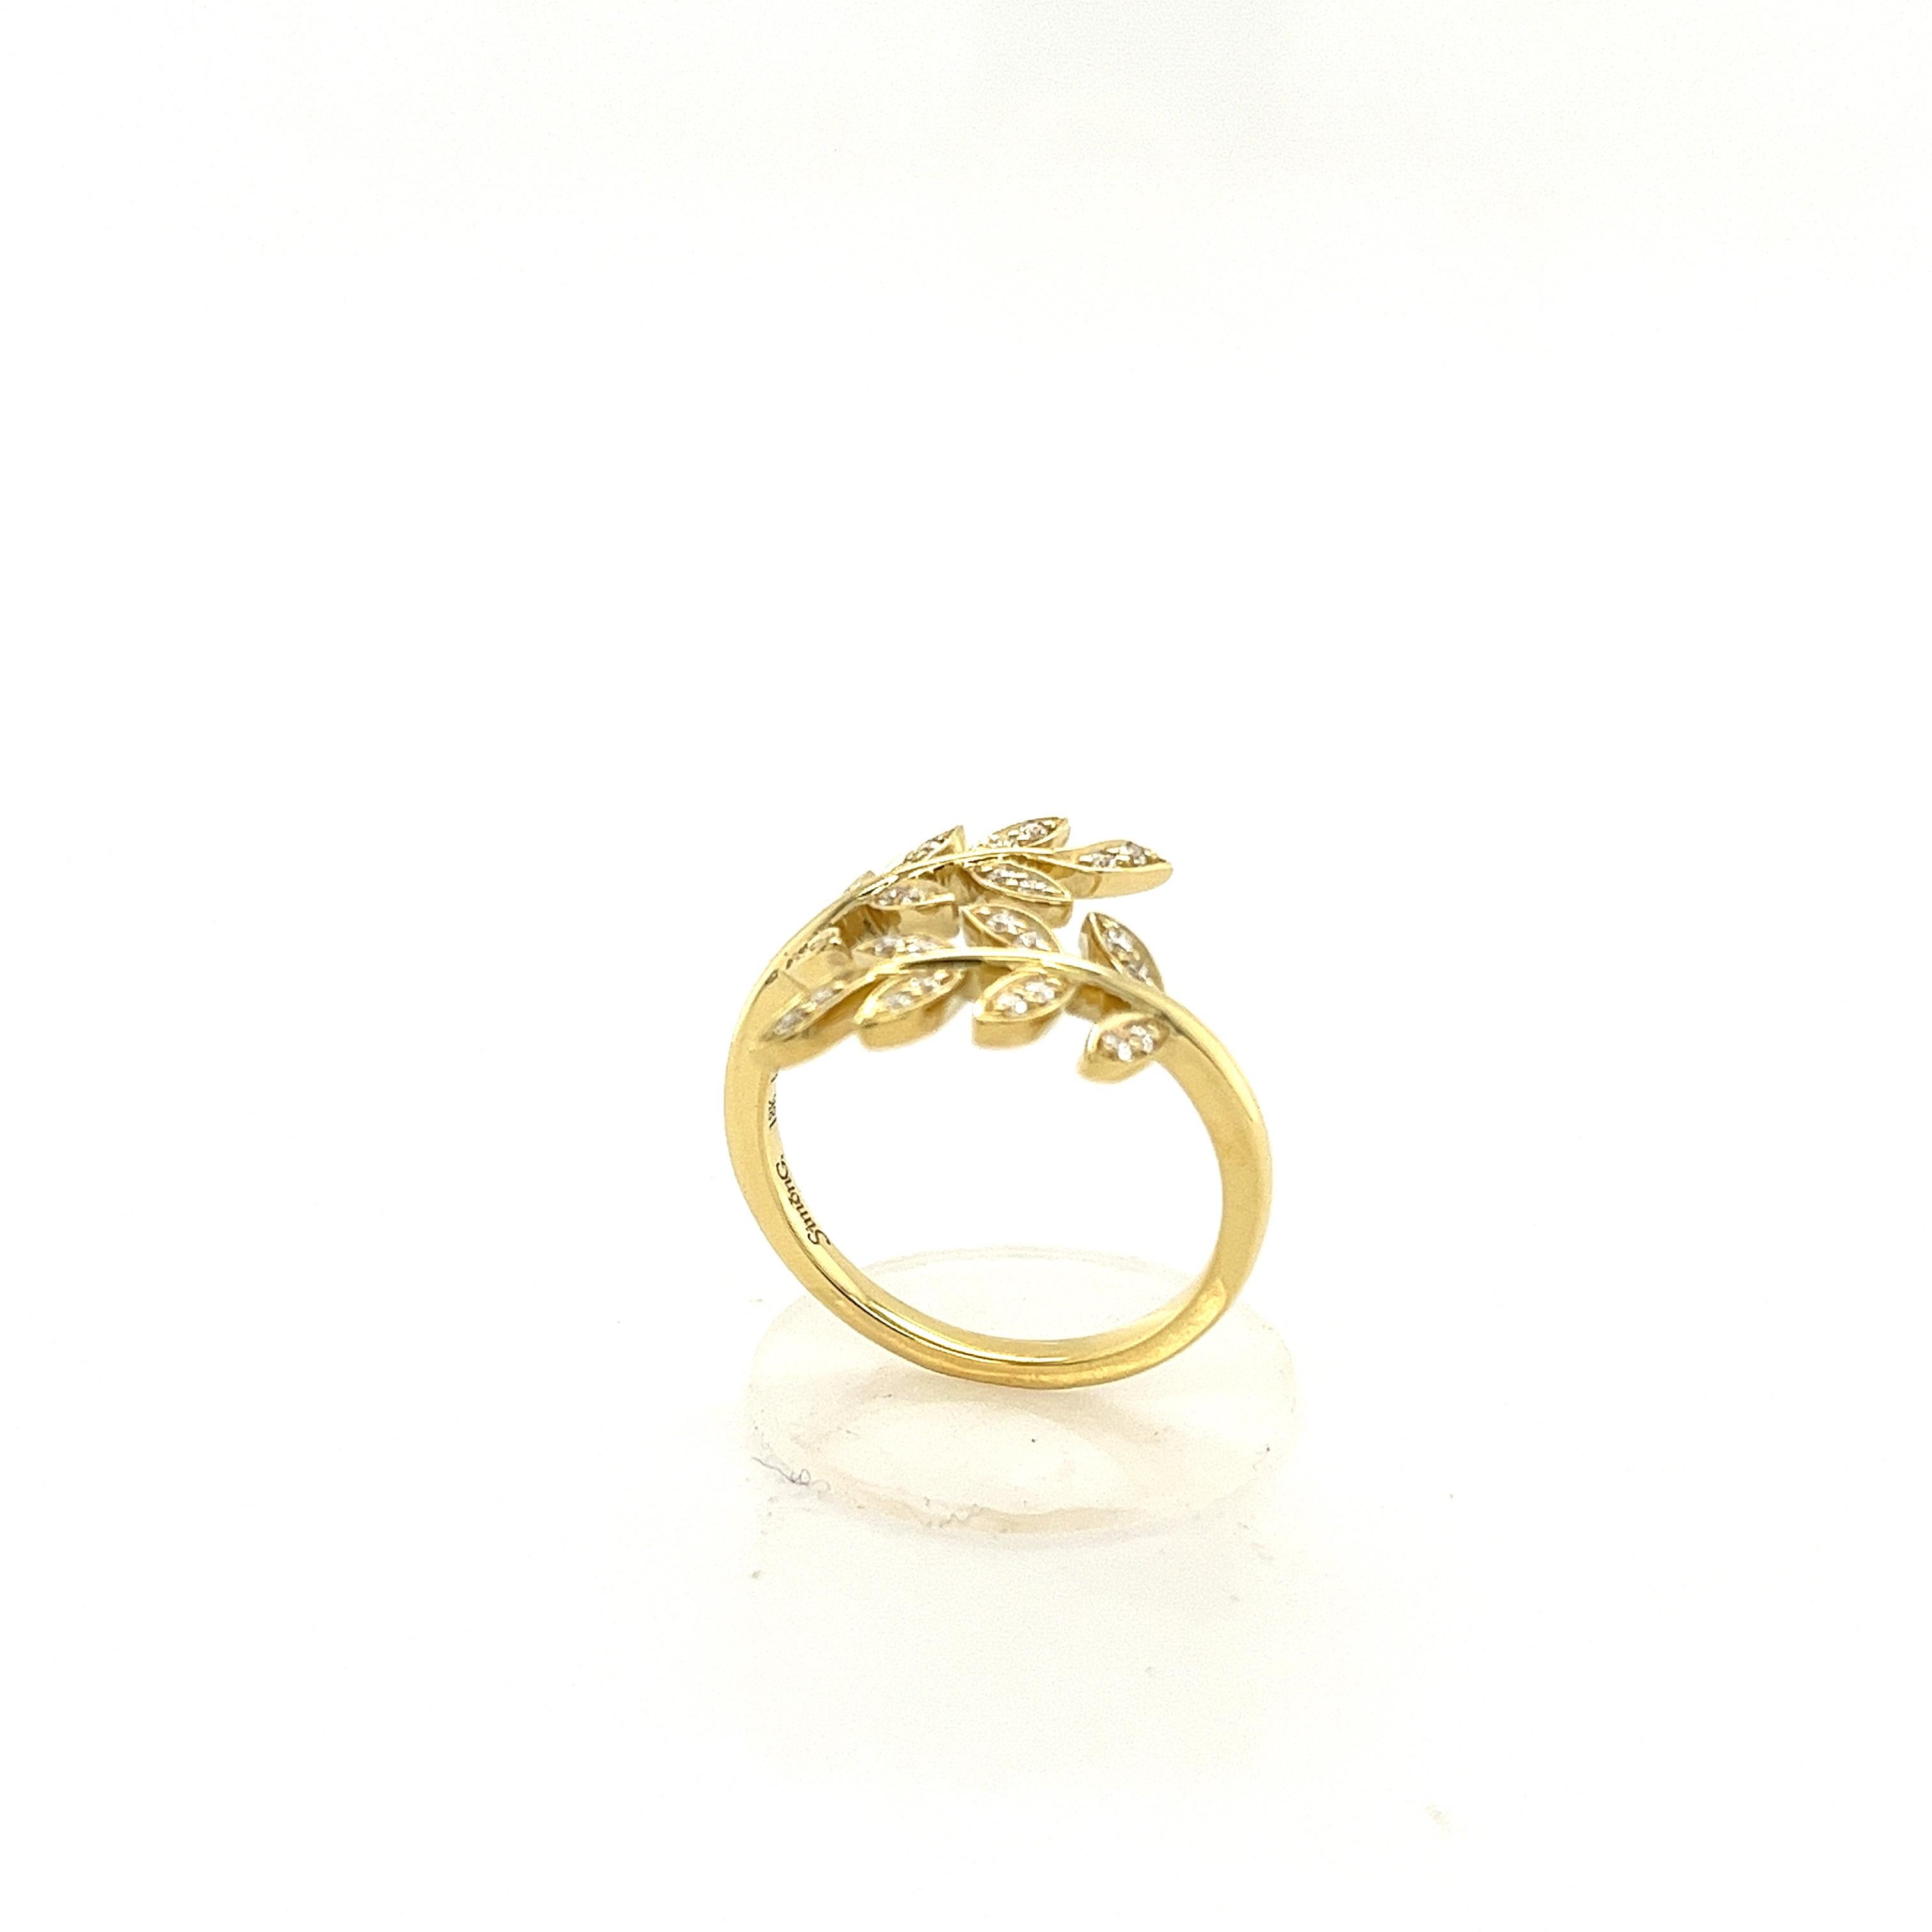 Simon G 18K Yellow Gold and Diamonds Open Style Ring Inspired by Nature For Sale 8